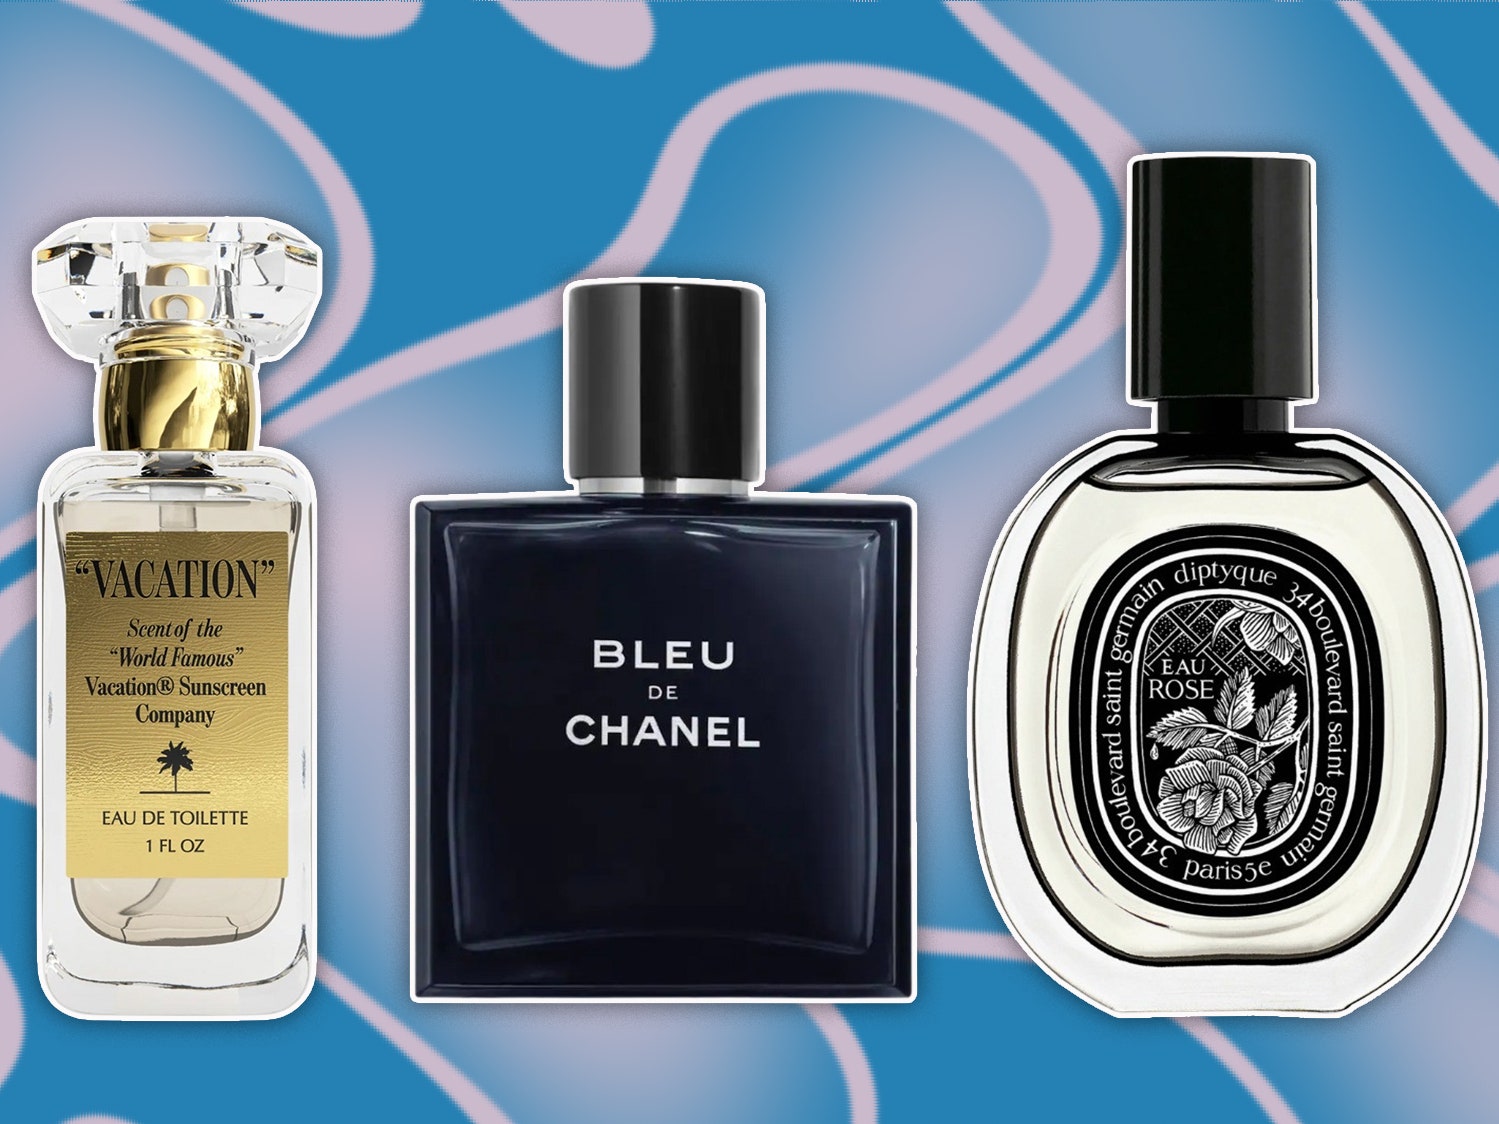 The Best Colognes Under $100 Smell Like a Million Bucks